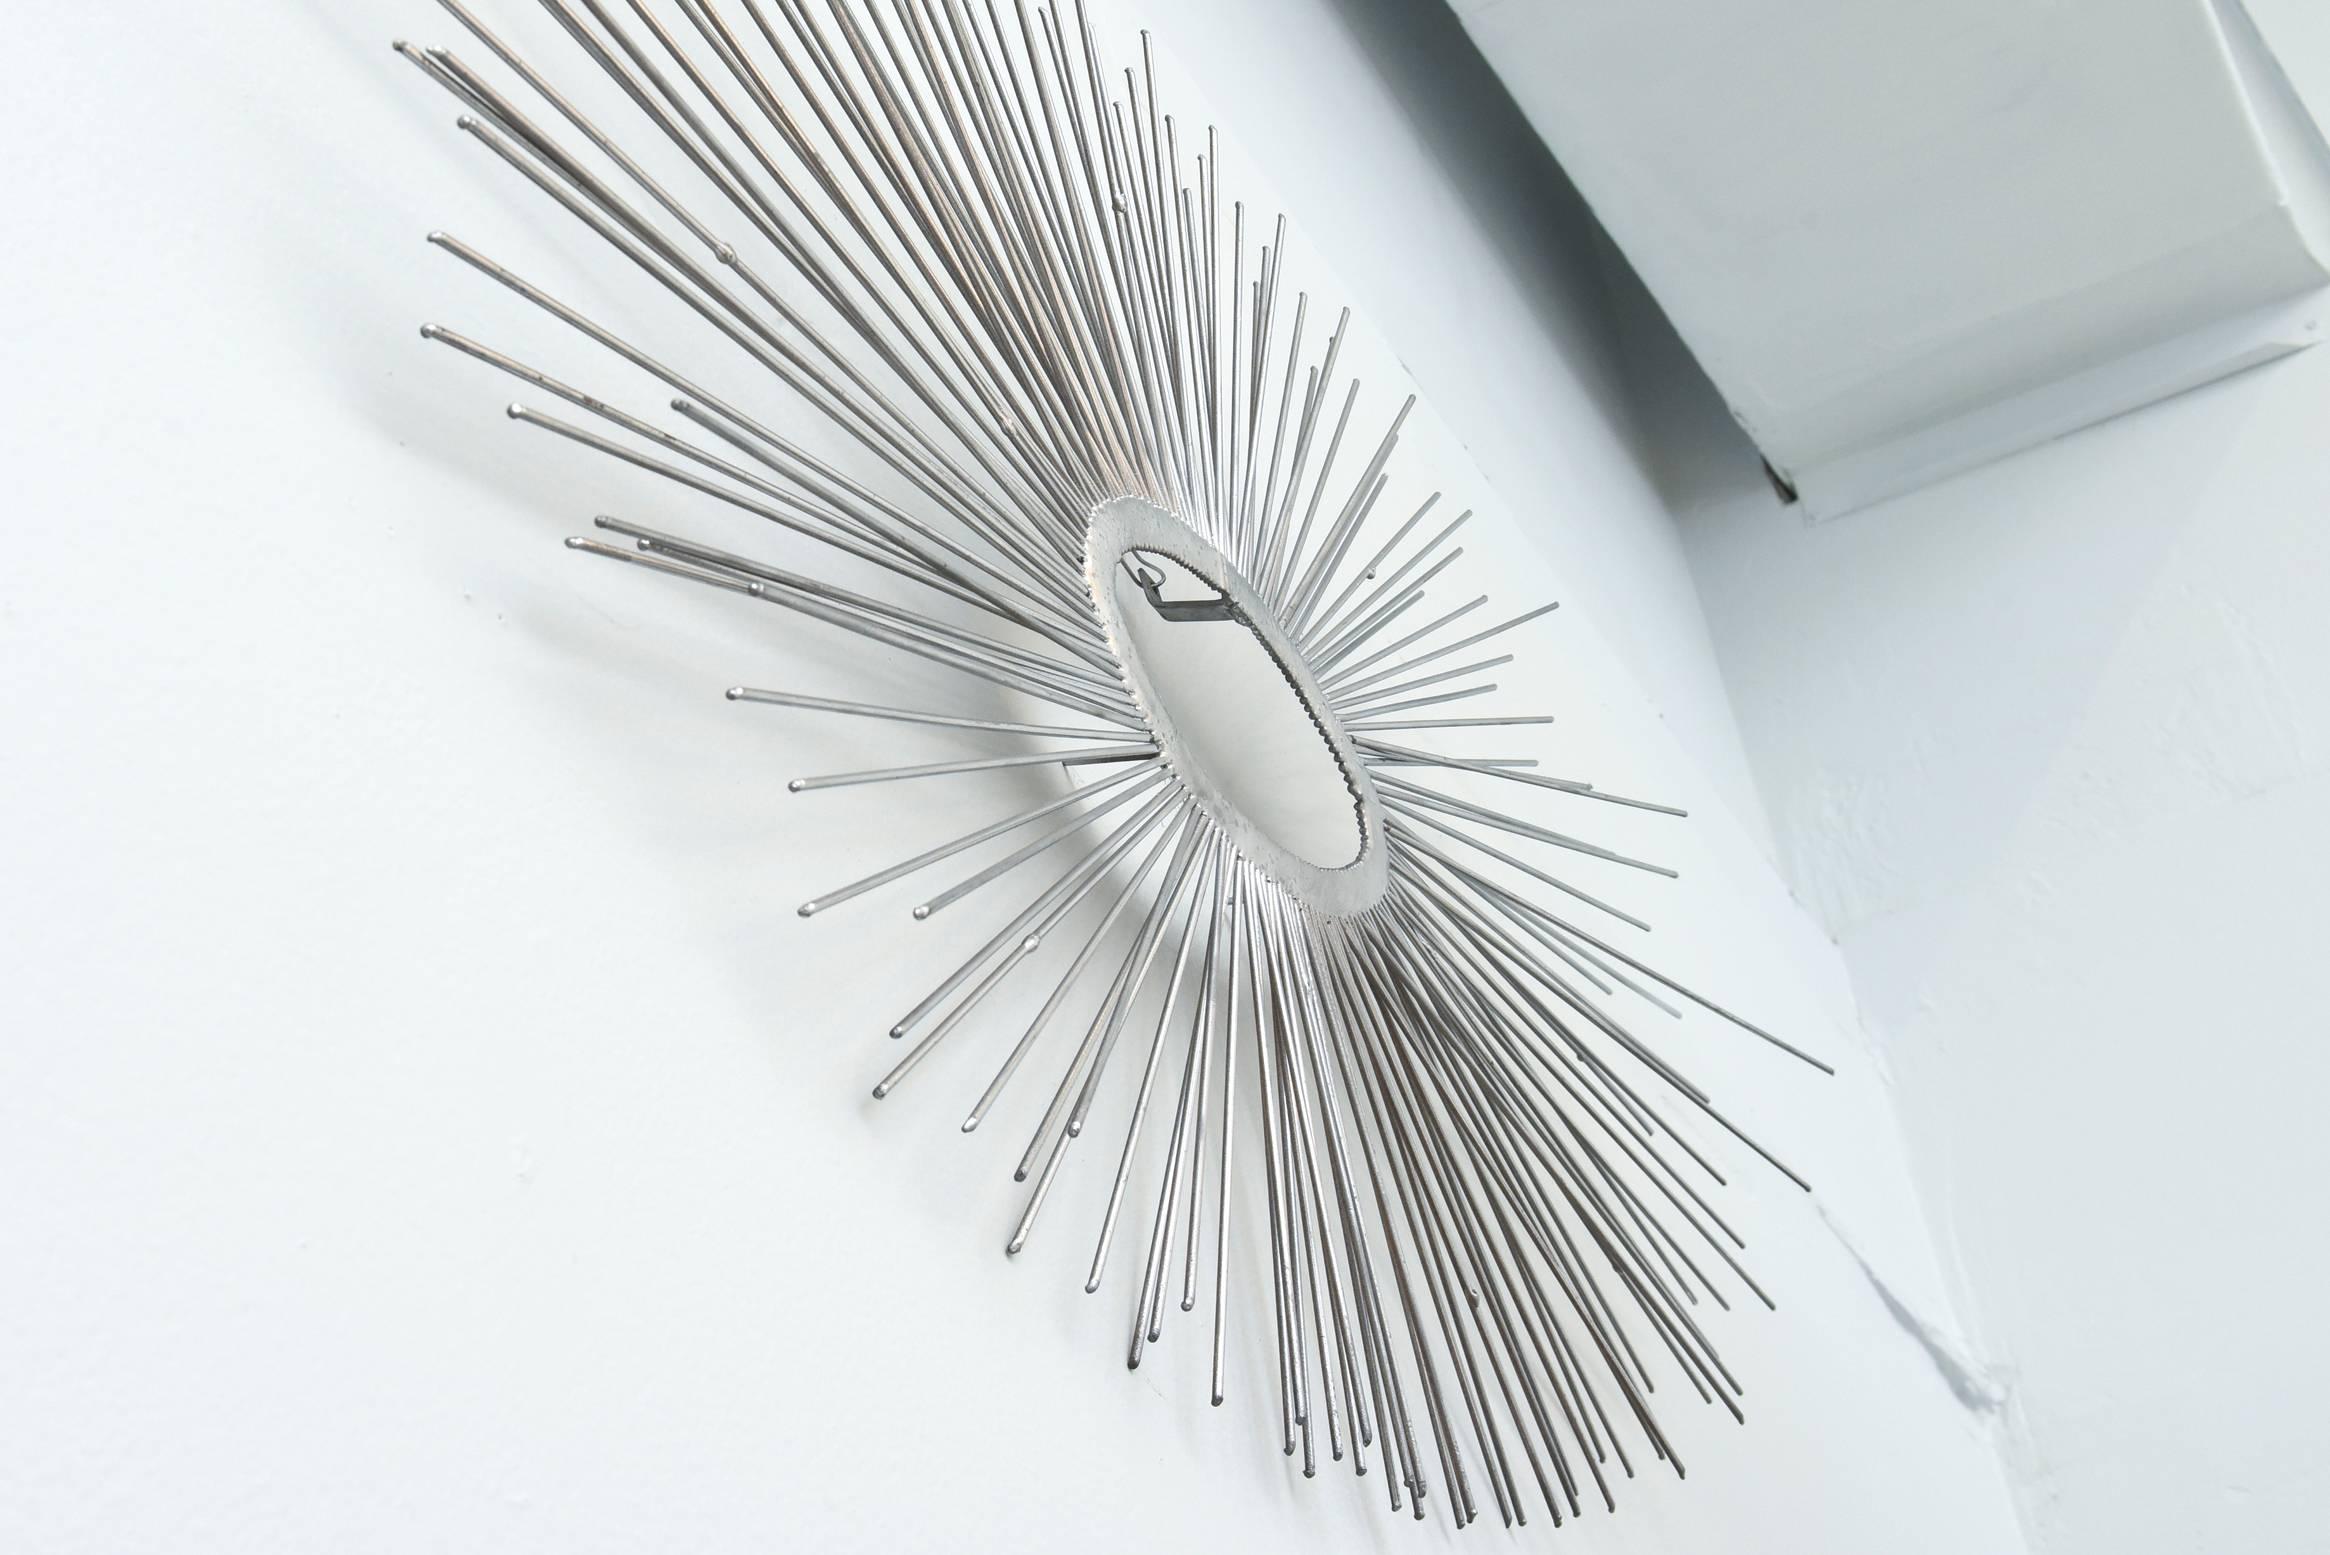 Late 20th Century American Modern Wall-Mounted Sunburst Sculpture, Curtis Jere, 1970's For Sale